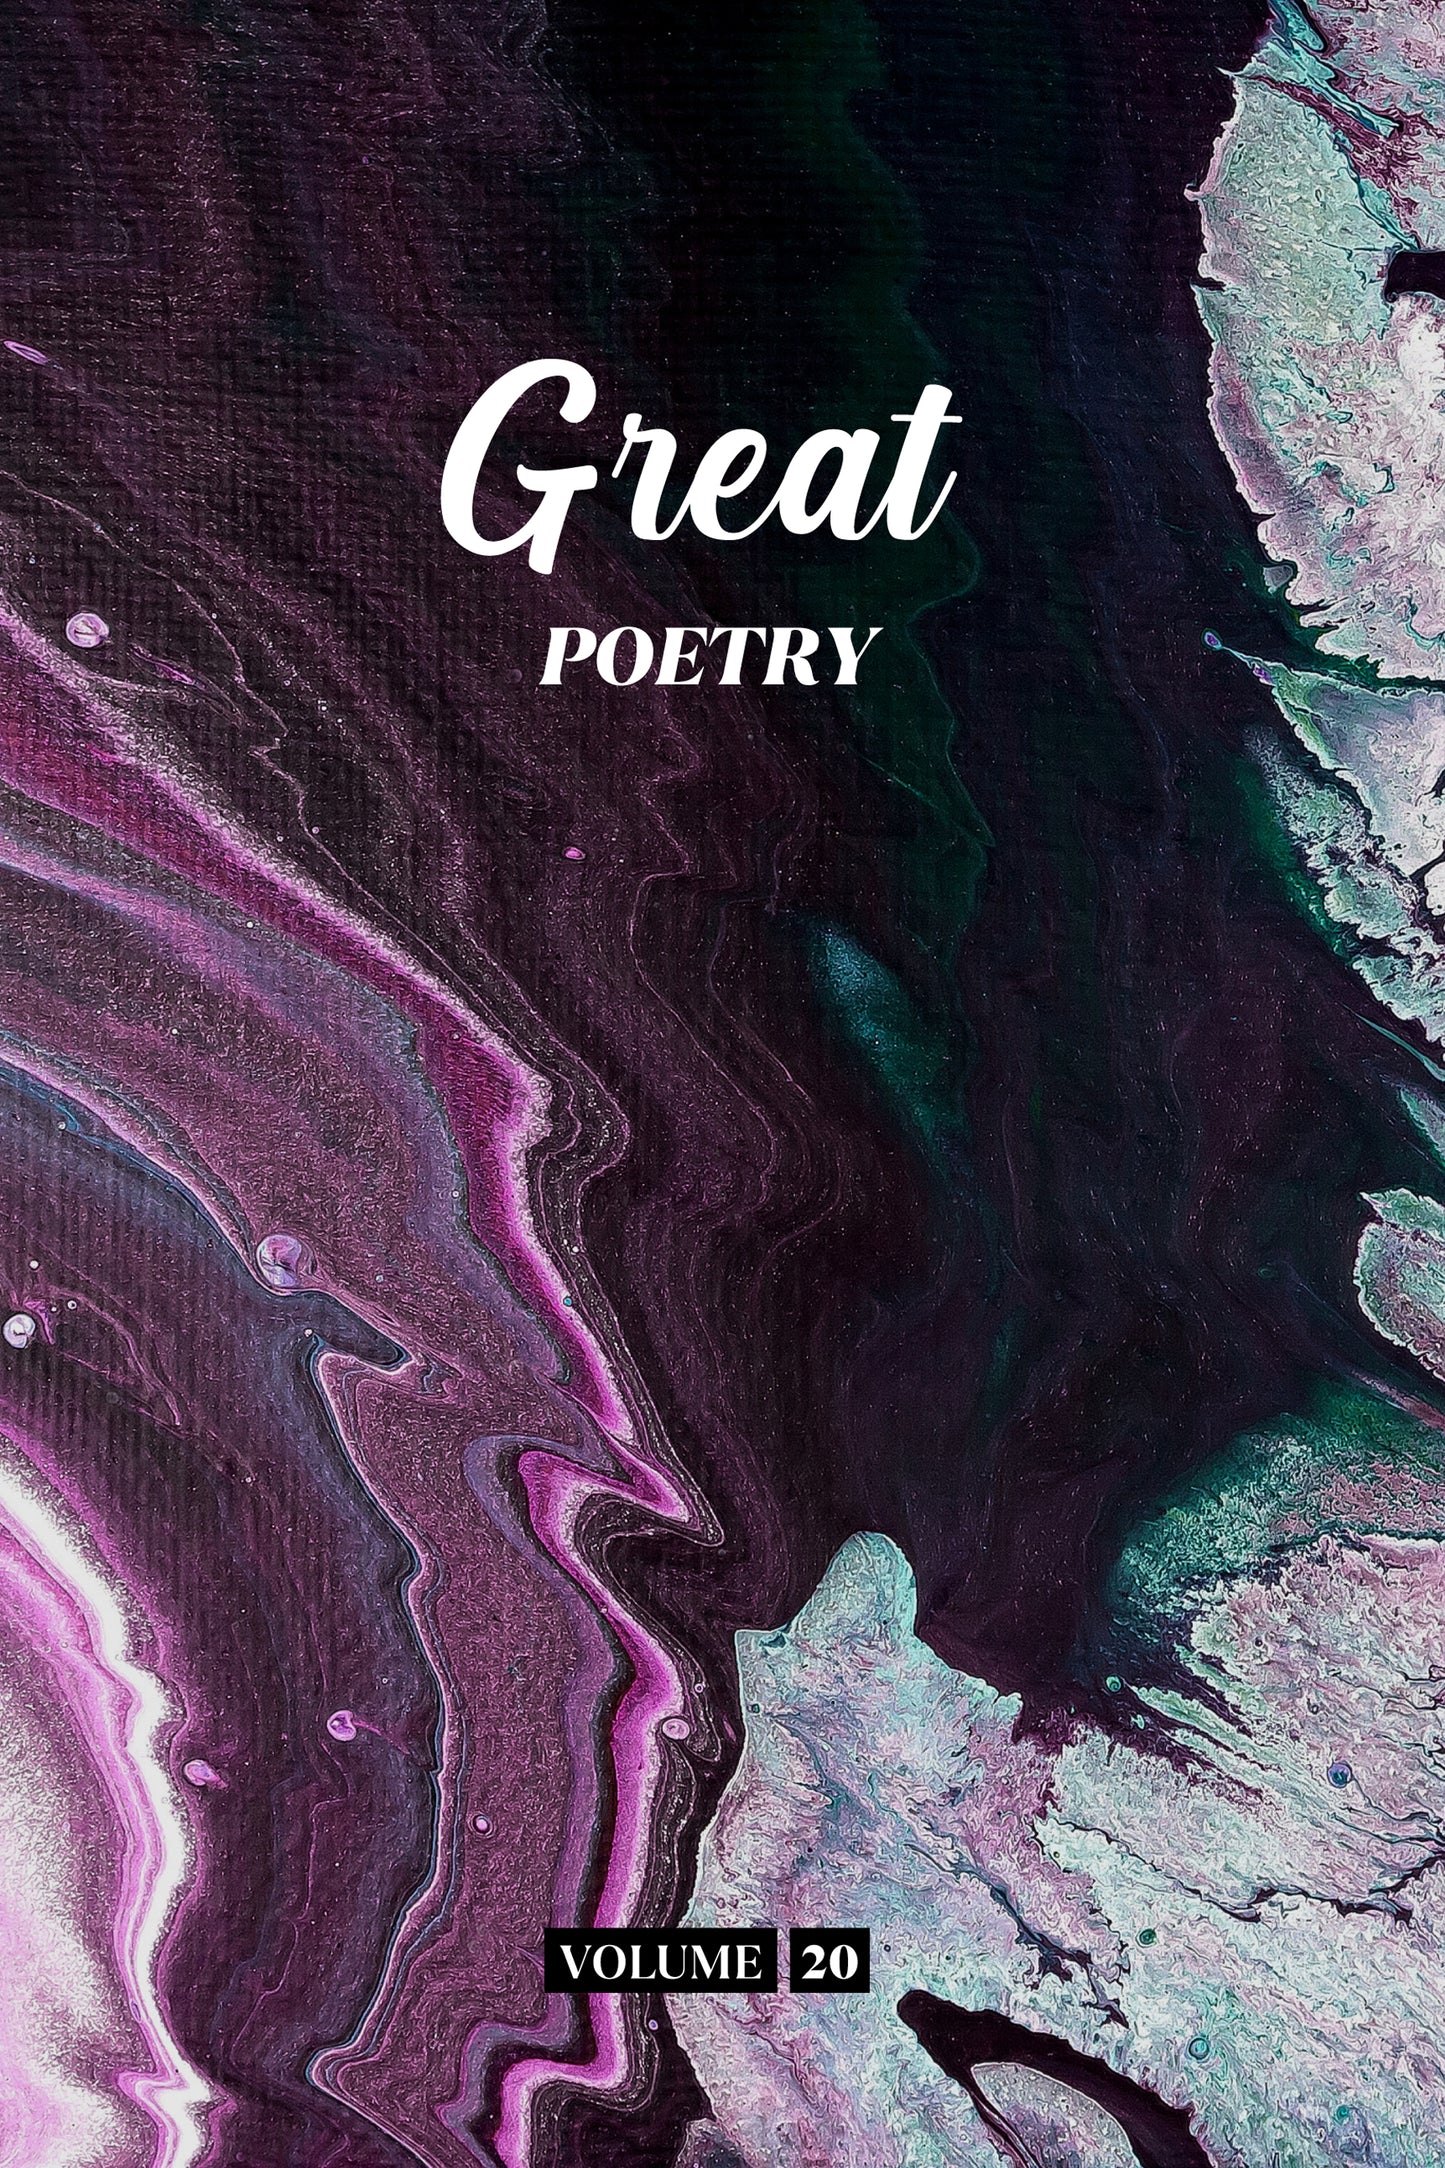 Great Poetry (Volume 20) - Physical Book (Pre-Order)